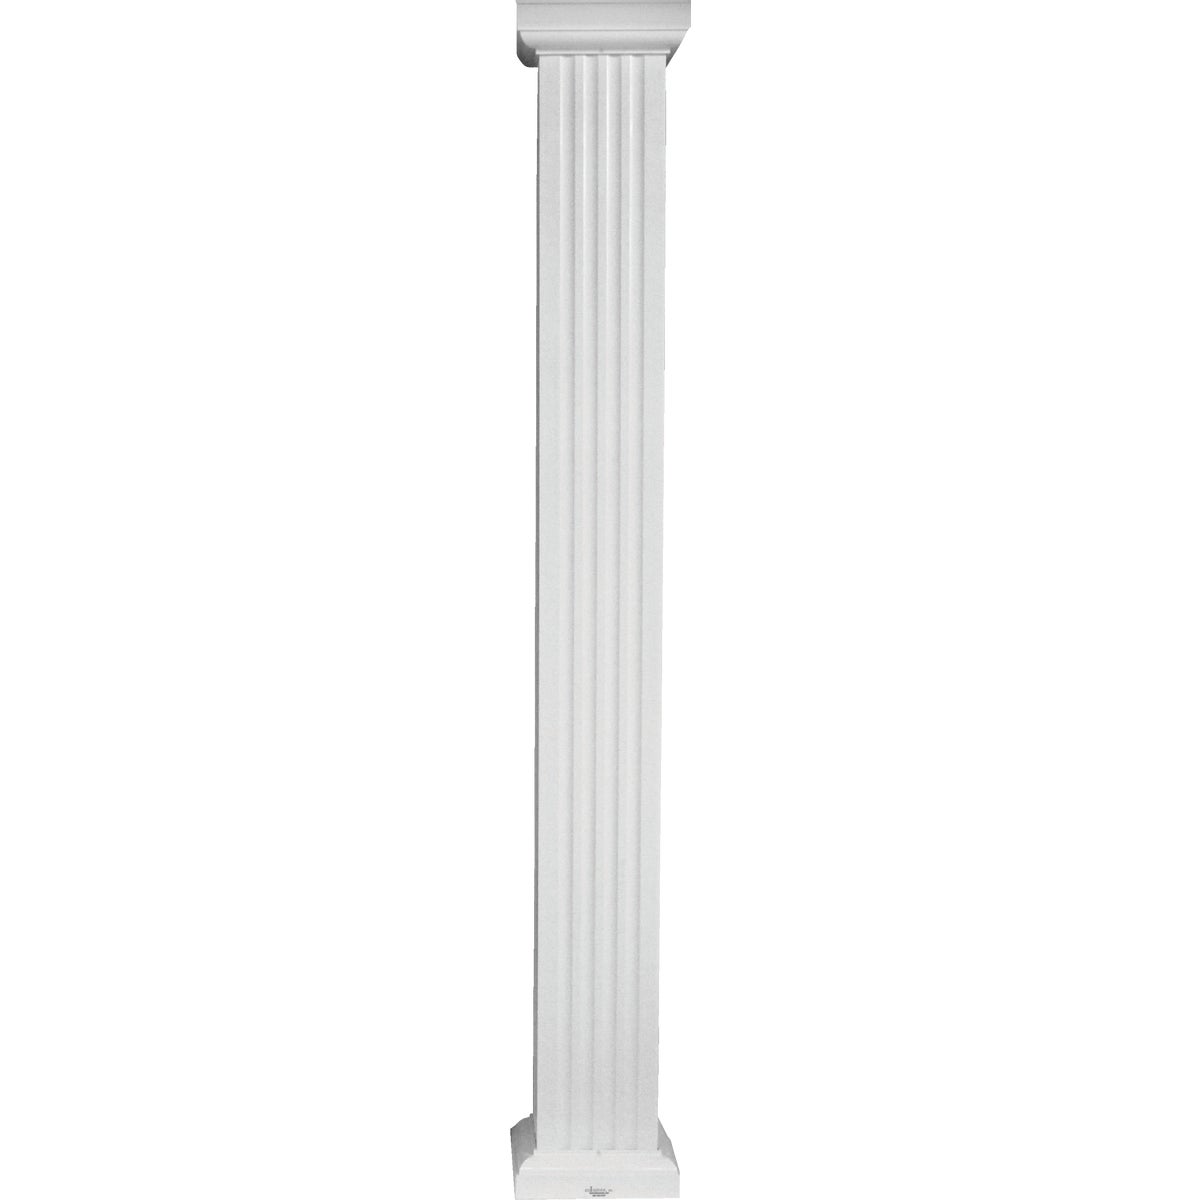 Item 160046, Square fluted columns. Individually wrapped for protection.